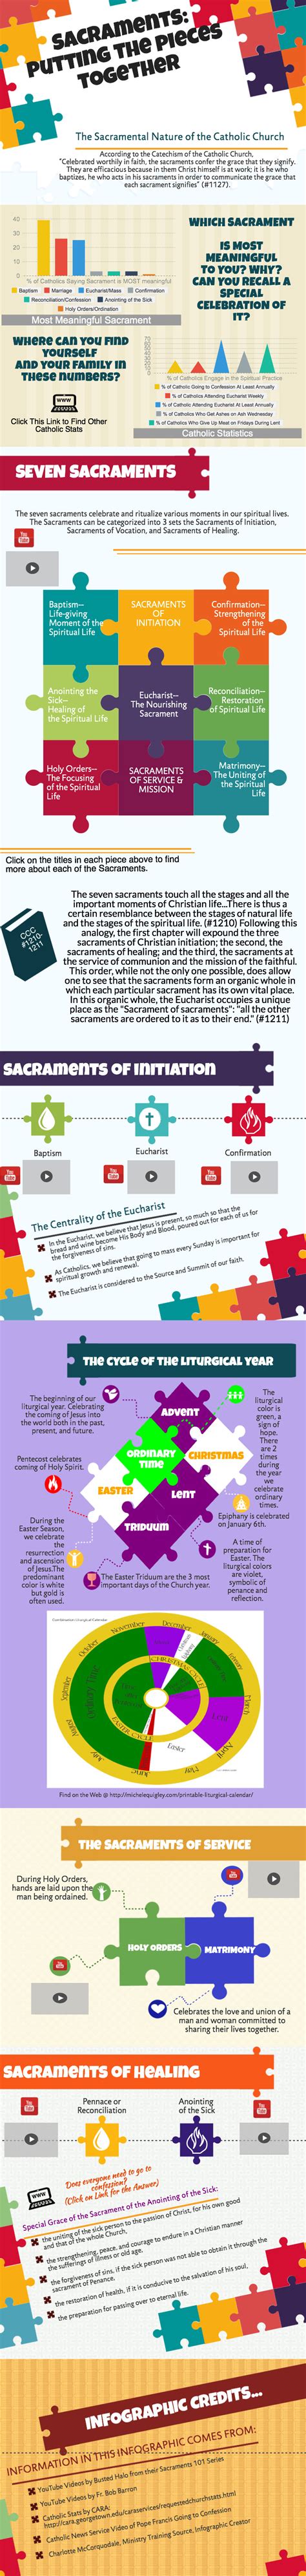 Sacraments Putting The Pieces Together This Info Graphic Can Help